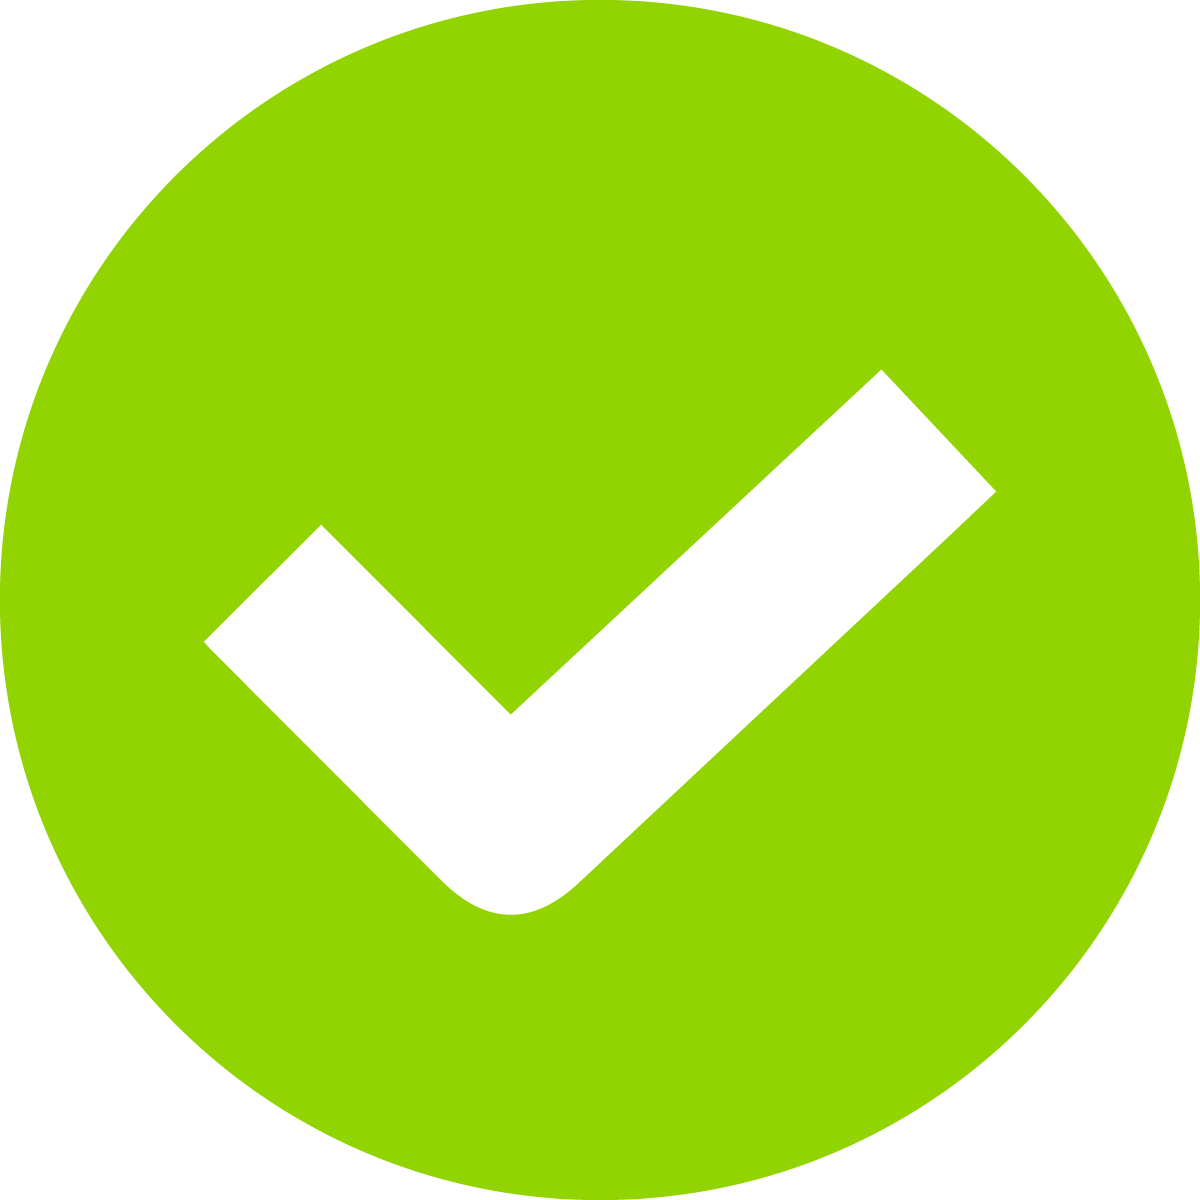 A white tick mark on a bright green background